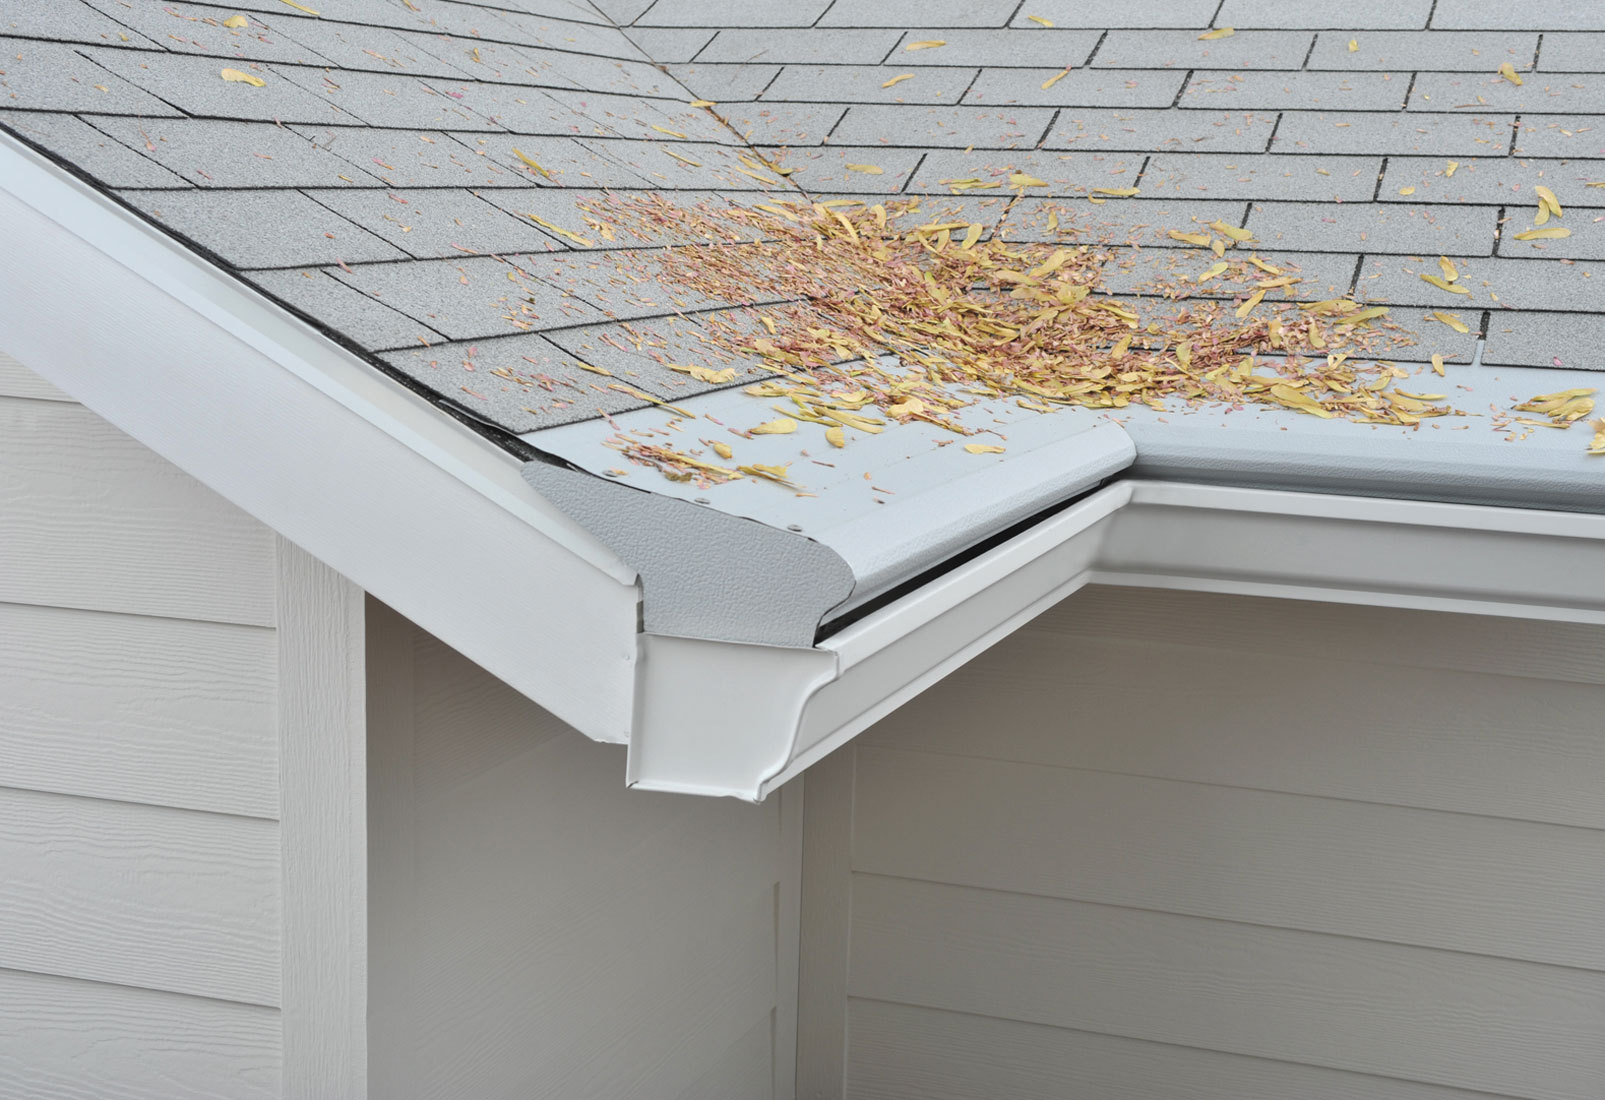 From Boston to Providence from Worcester to Manchester, NH; Rain Gutter Guards are crucial to